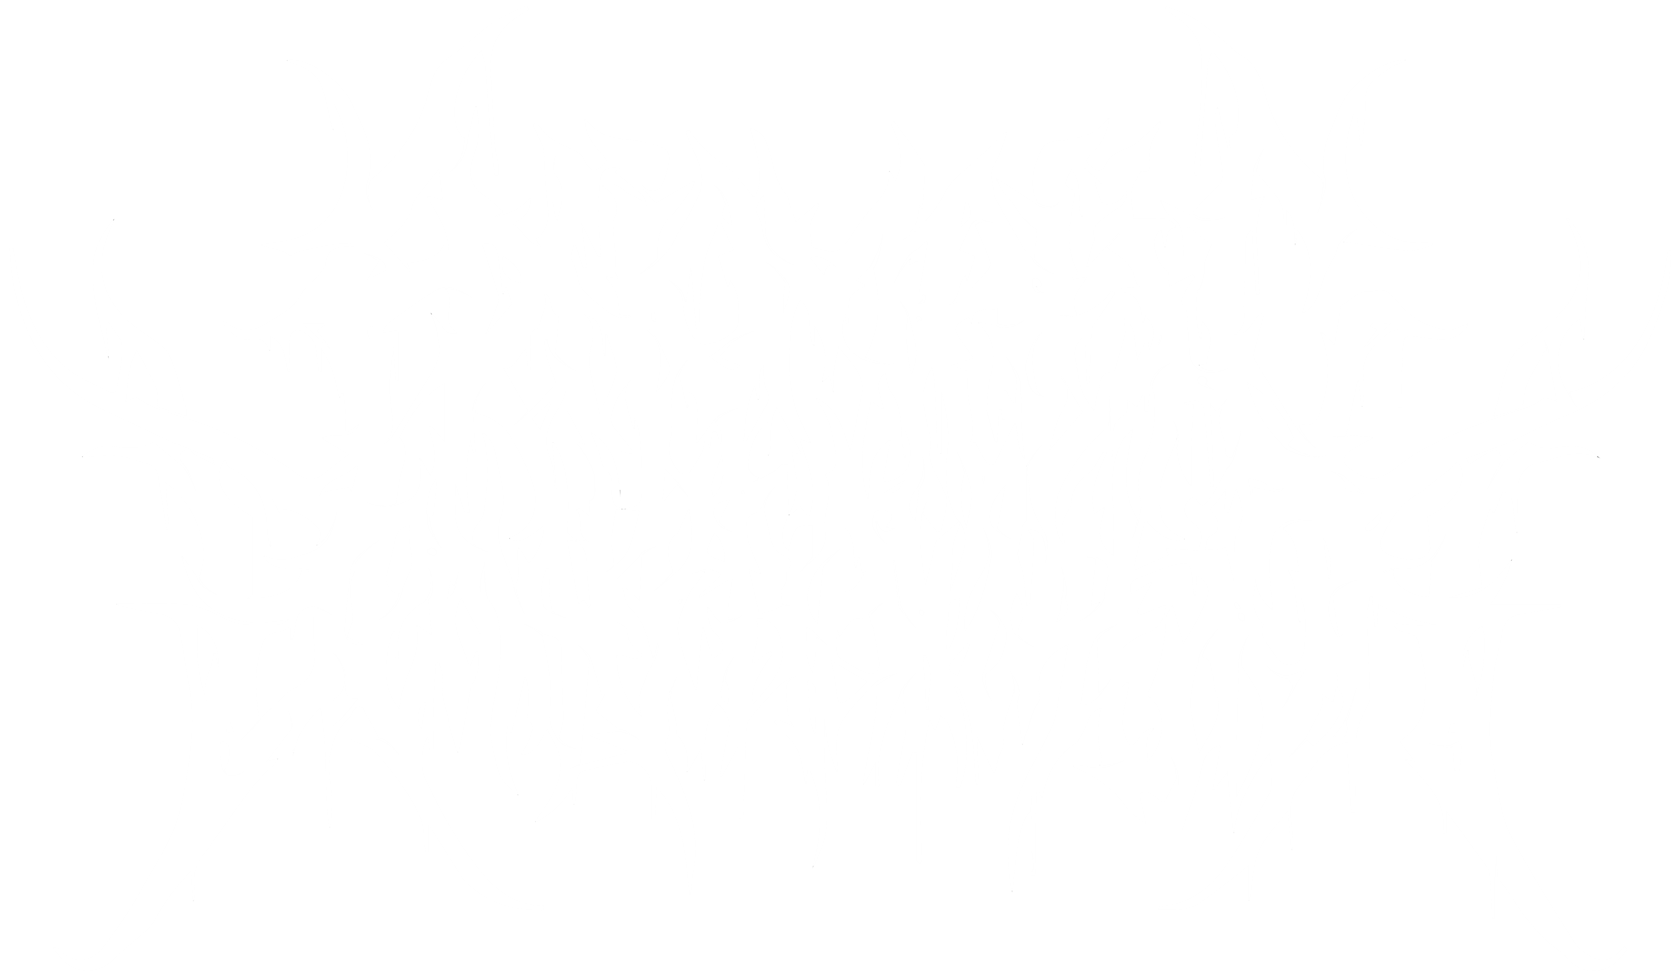 Axiomatic dematerialization band logo with torn edges